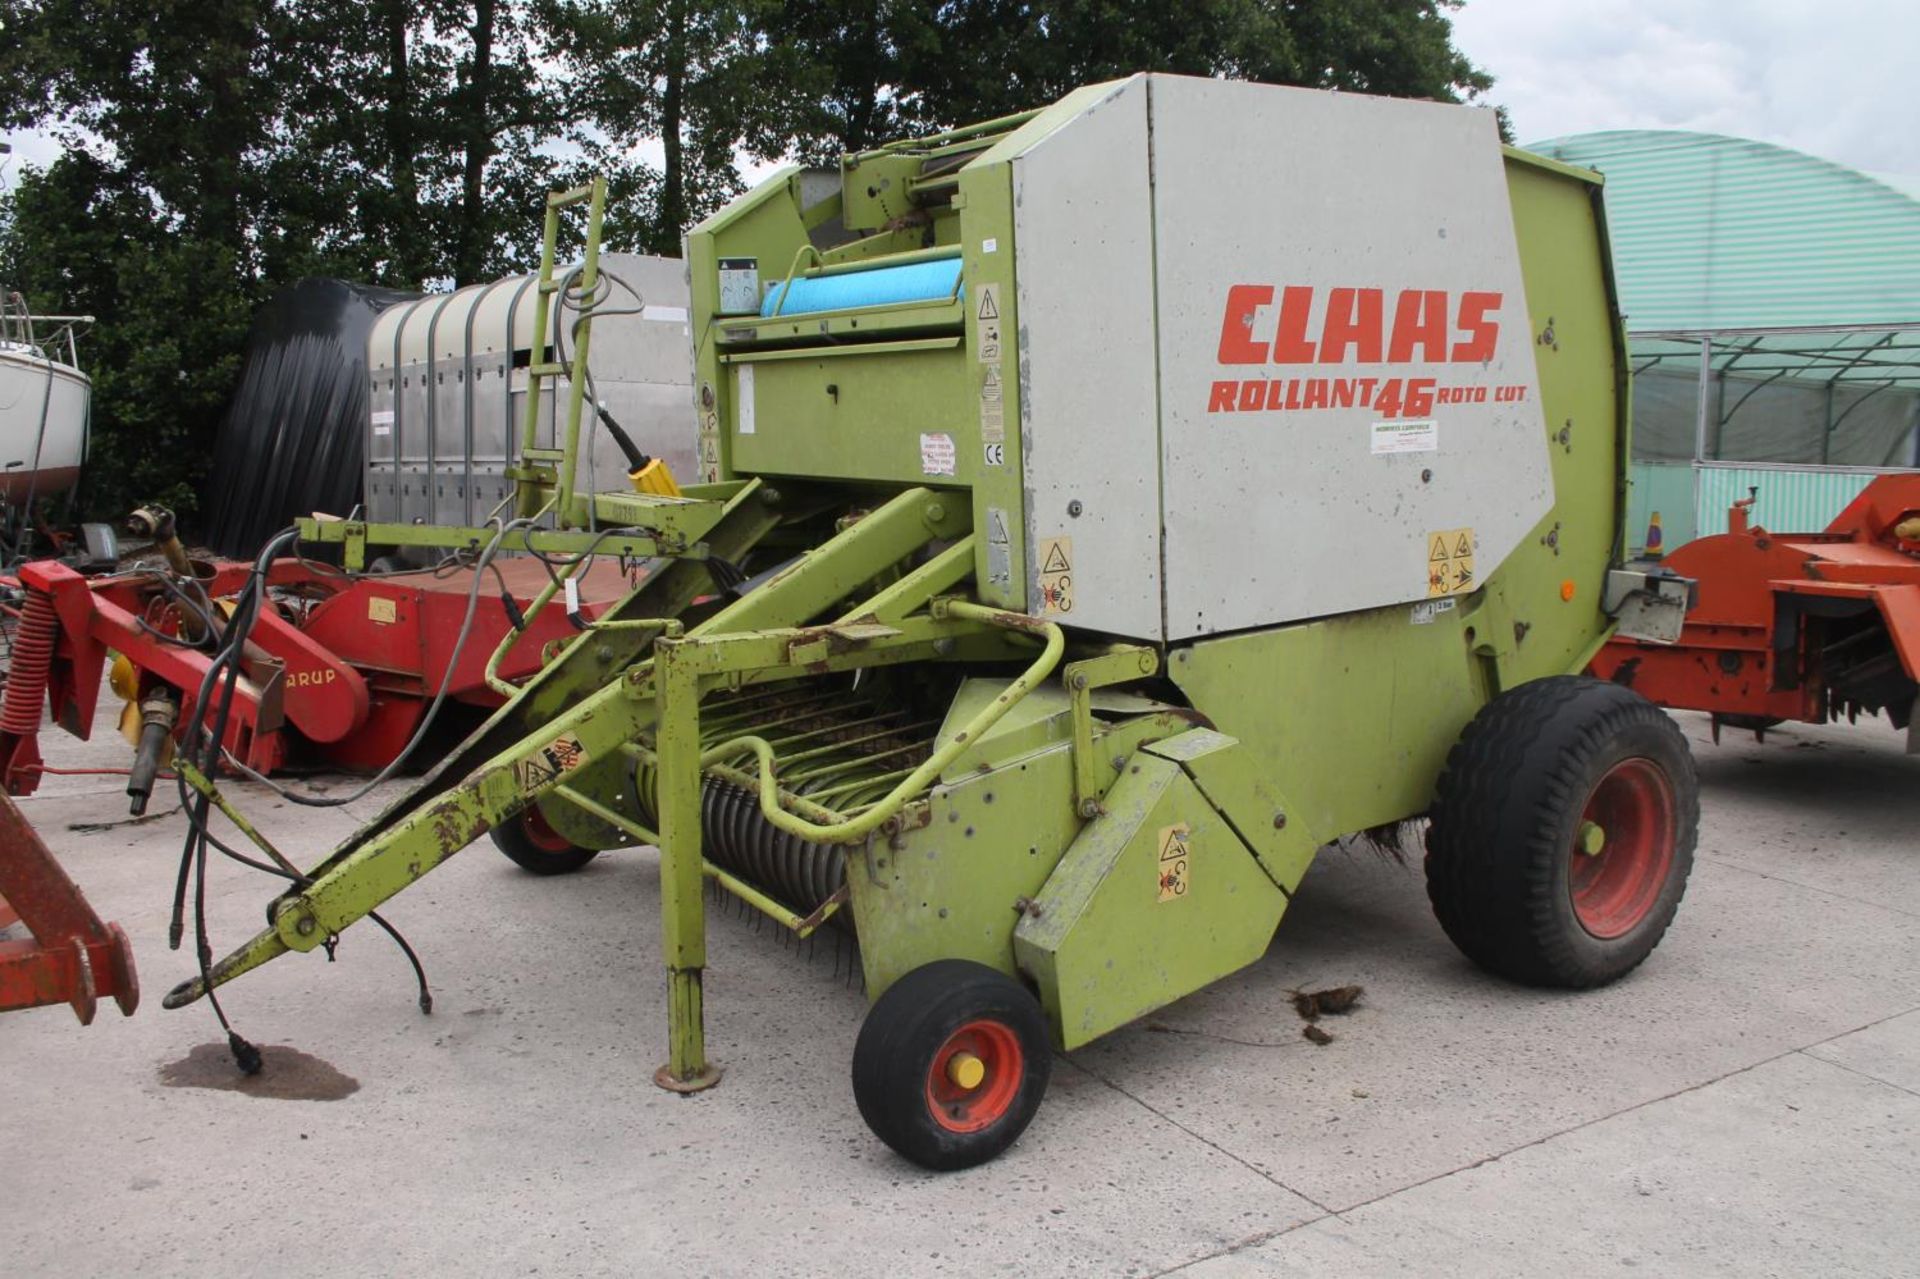 CLASS ROLLANT 46 ROTOCUT ROUND BALER WITH PTO IN WORKING OEDER + VAT